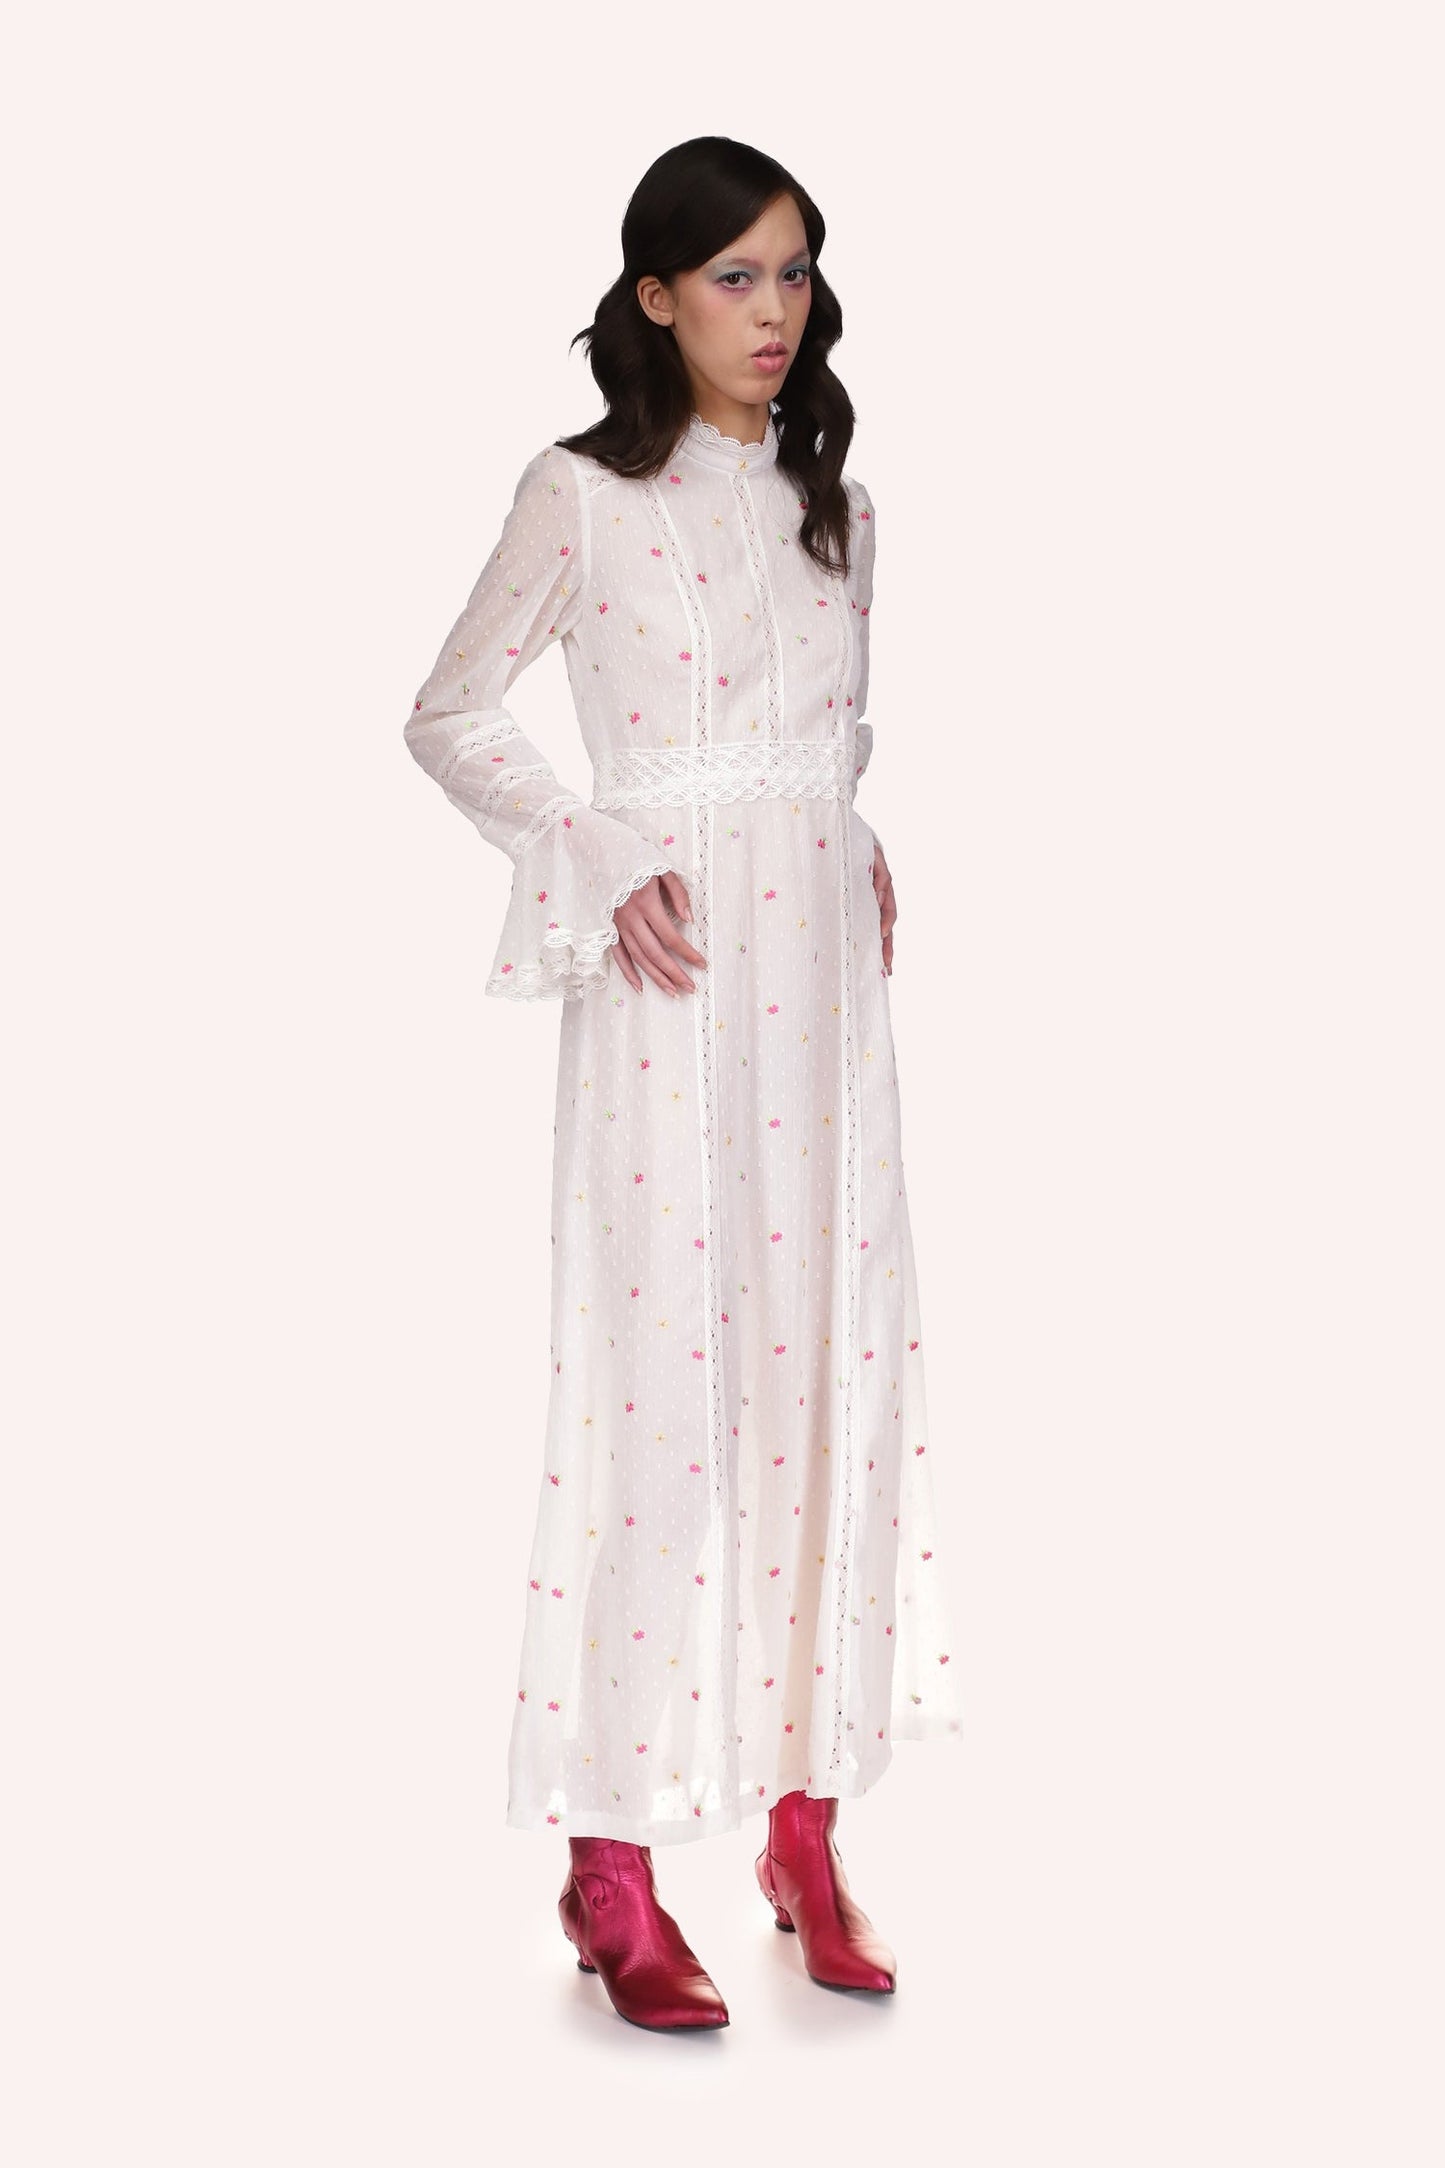 Cluny Lace Trimmed Floral Swiss Dot Maxi Dress, Mandarin laced collar, white with red dots